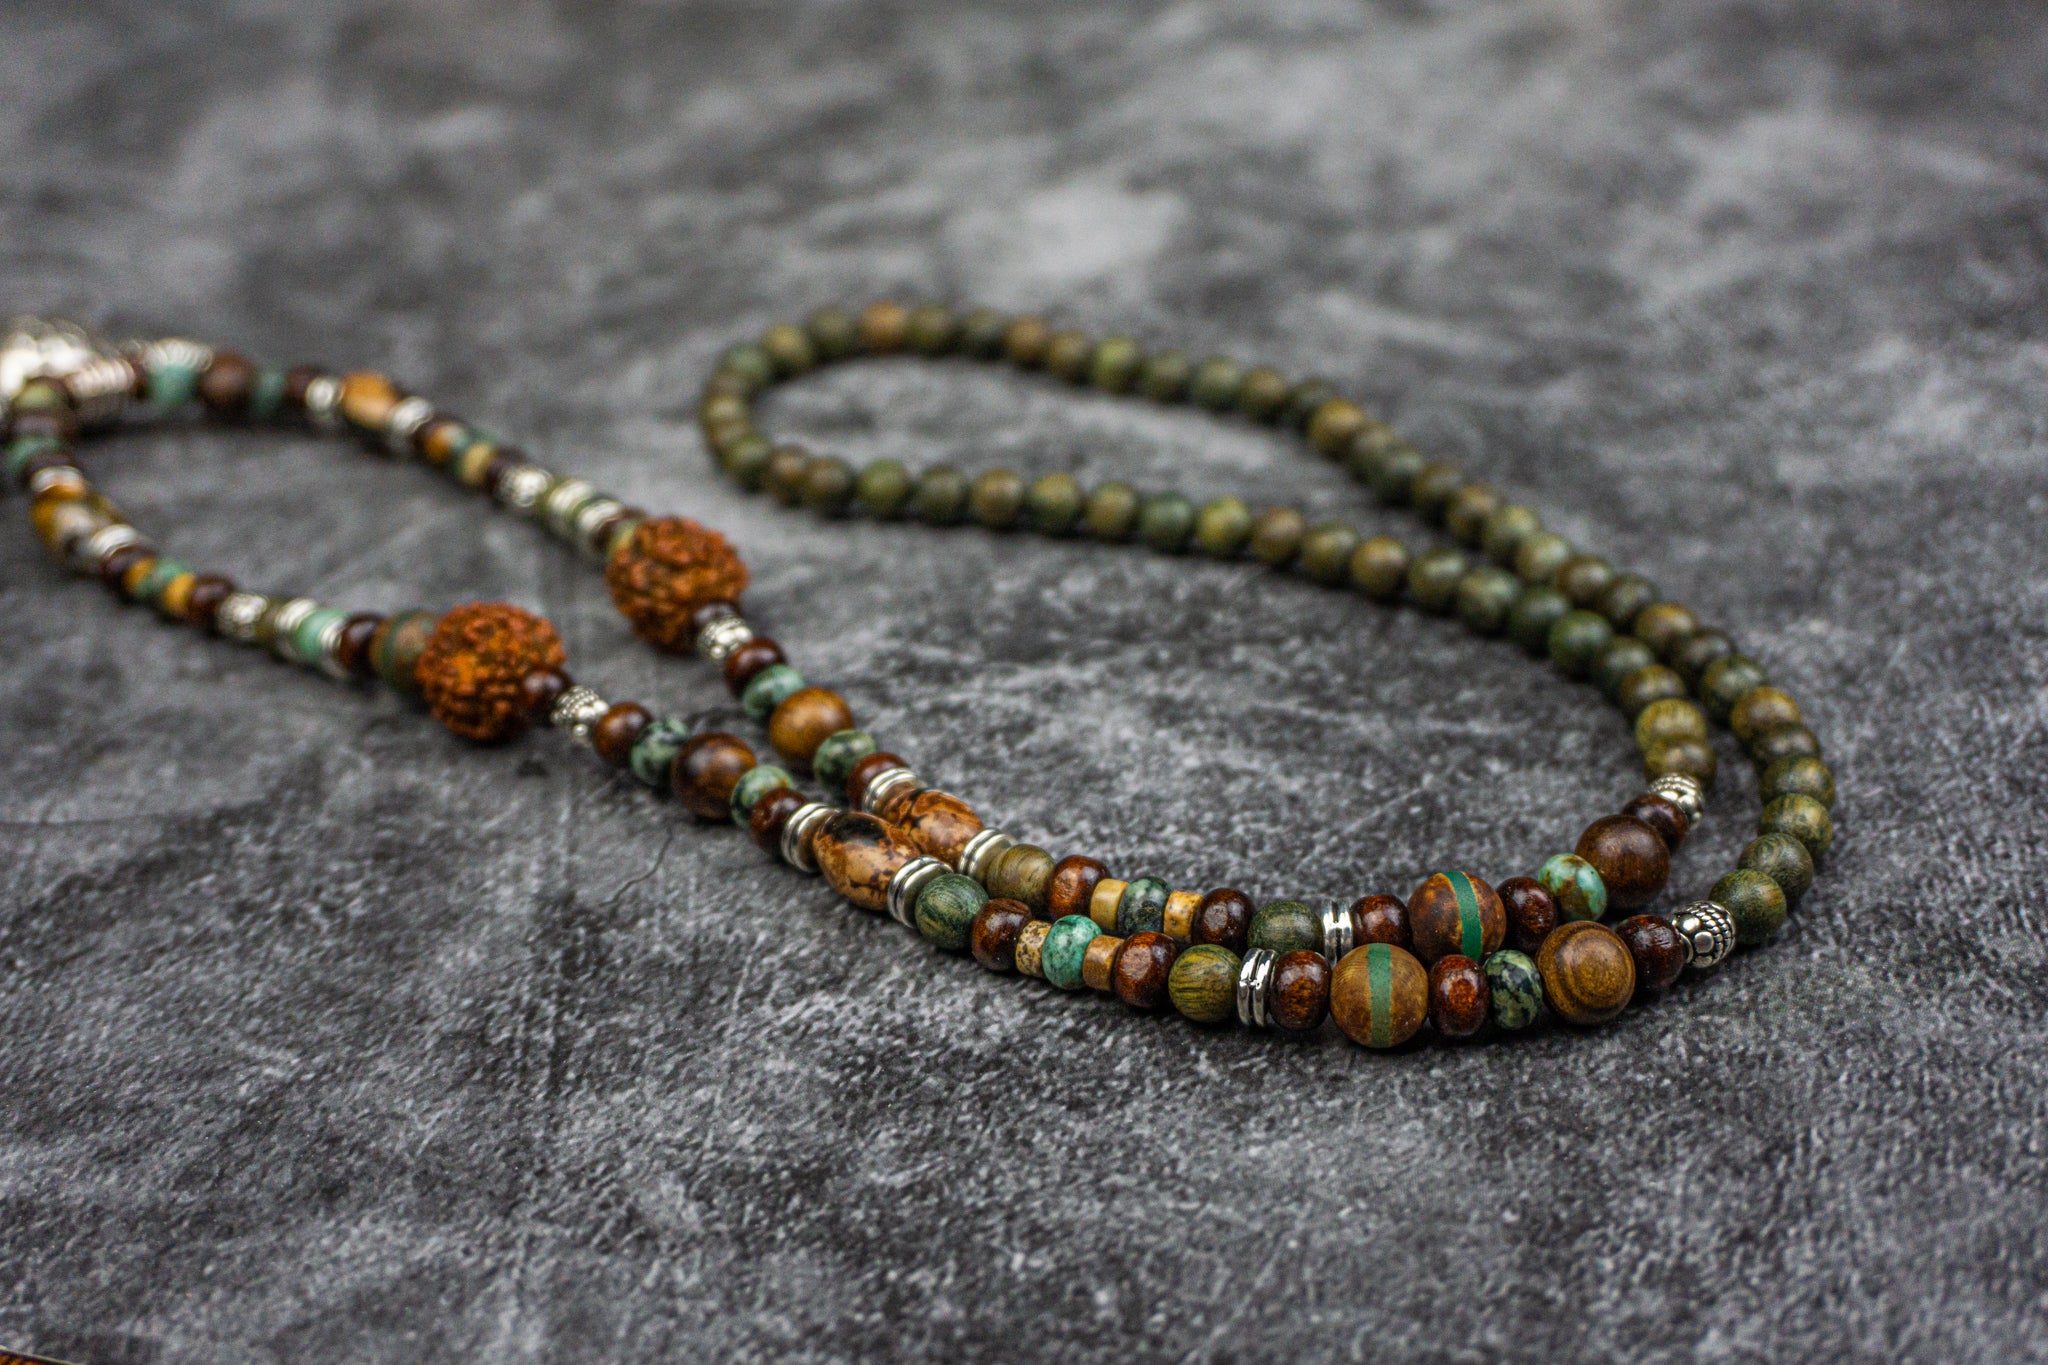 green wood and gemstone beads necklace with a silver colored bull skull pendant- wander jewellery